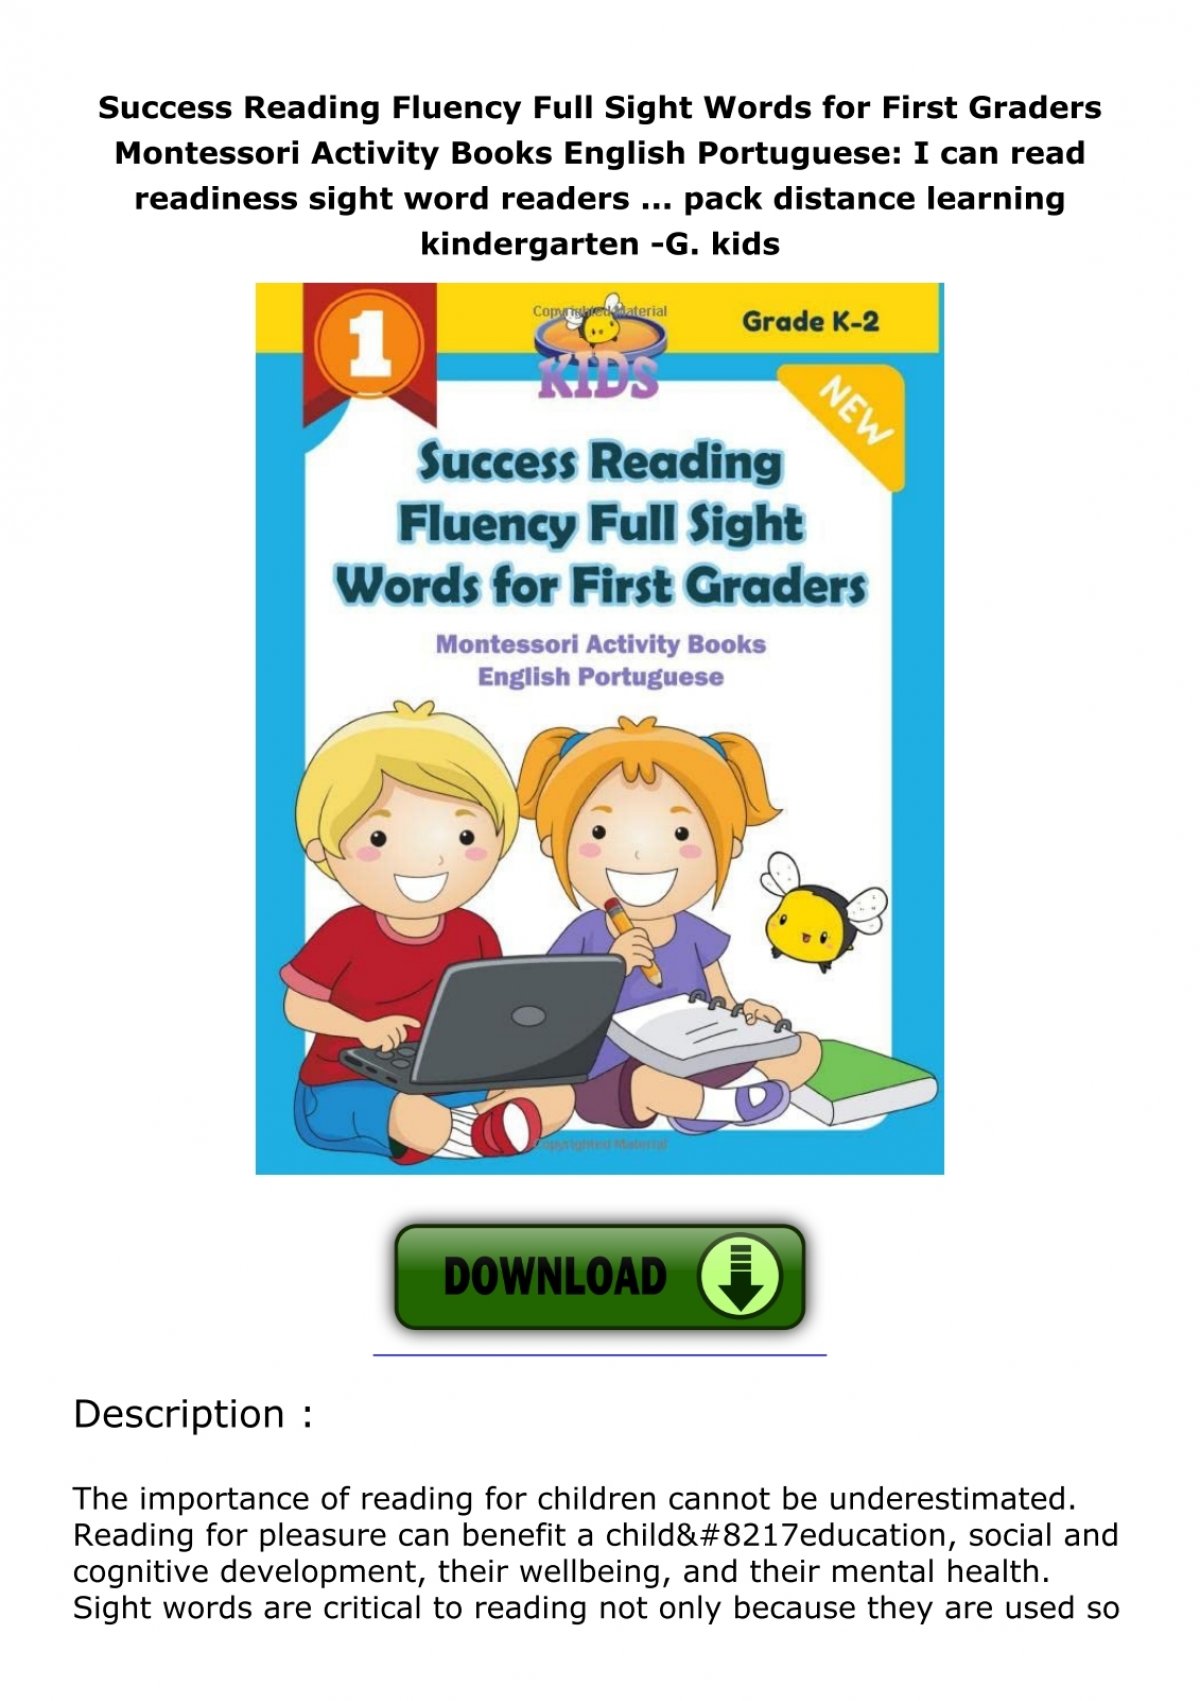 pdf-read-success-reading-fluency-full-sight-words-for-first-graders-montessori-activity